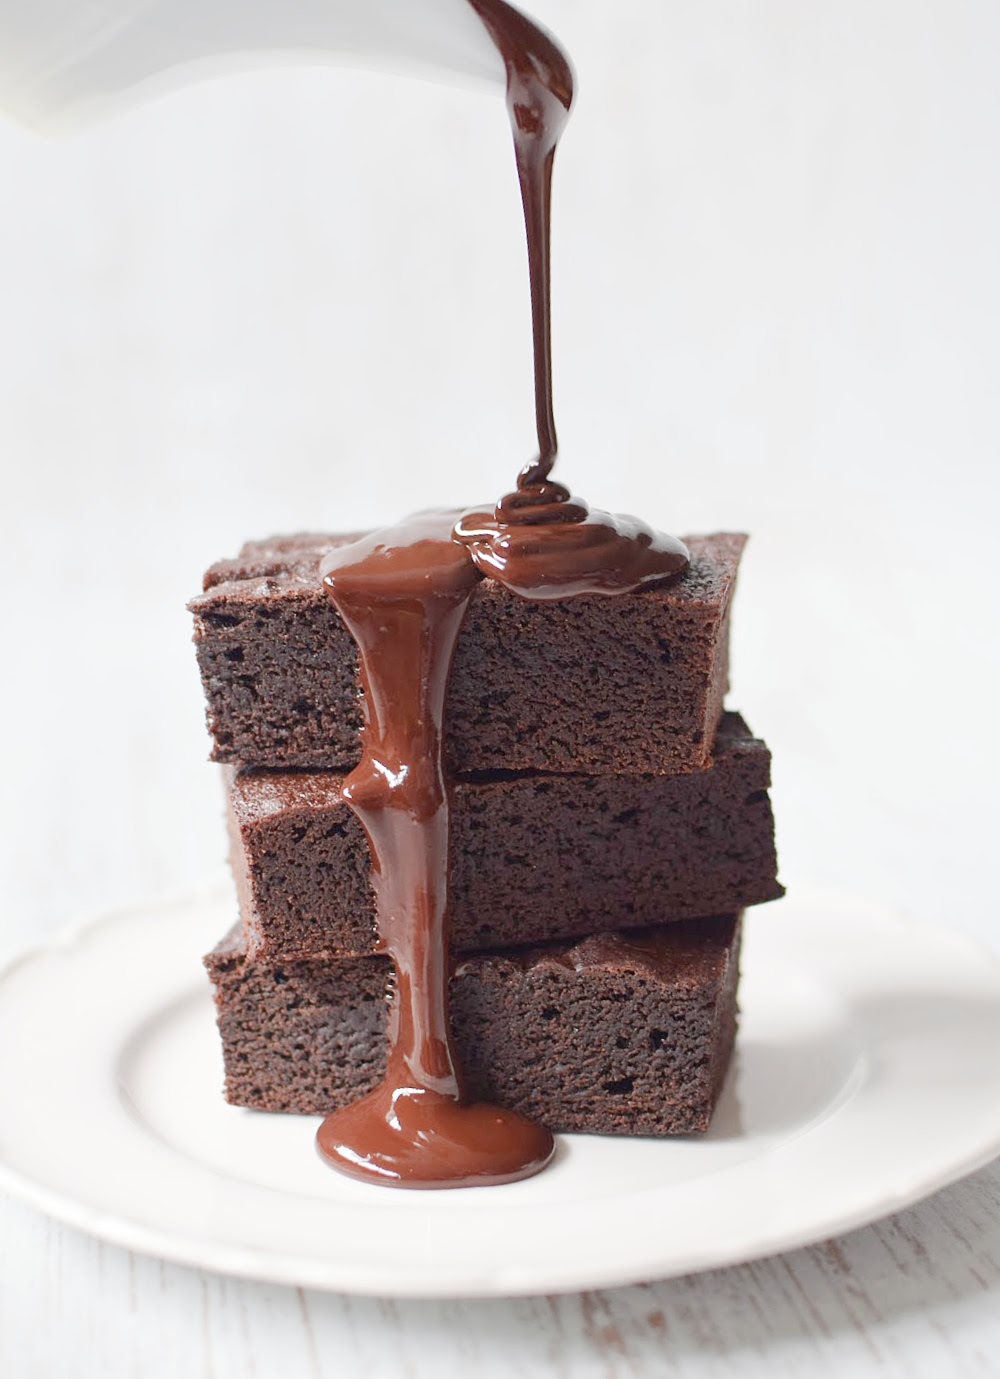 Pouring melted chocolate over a stack of brownies